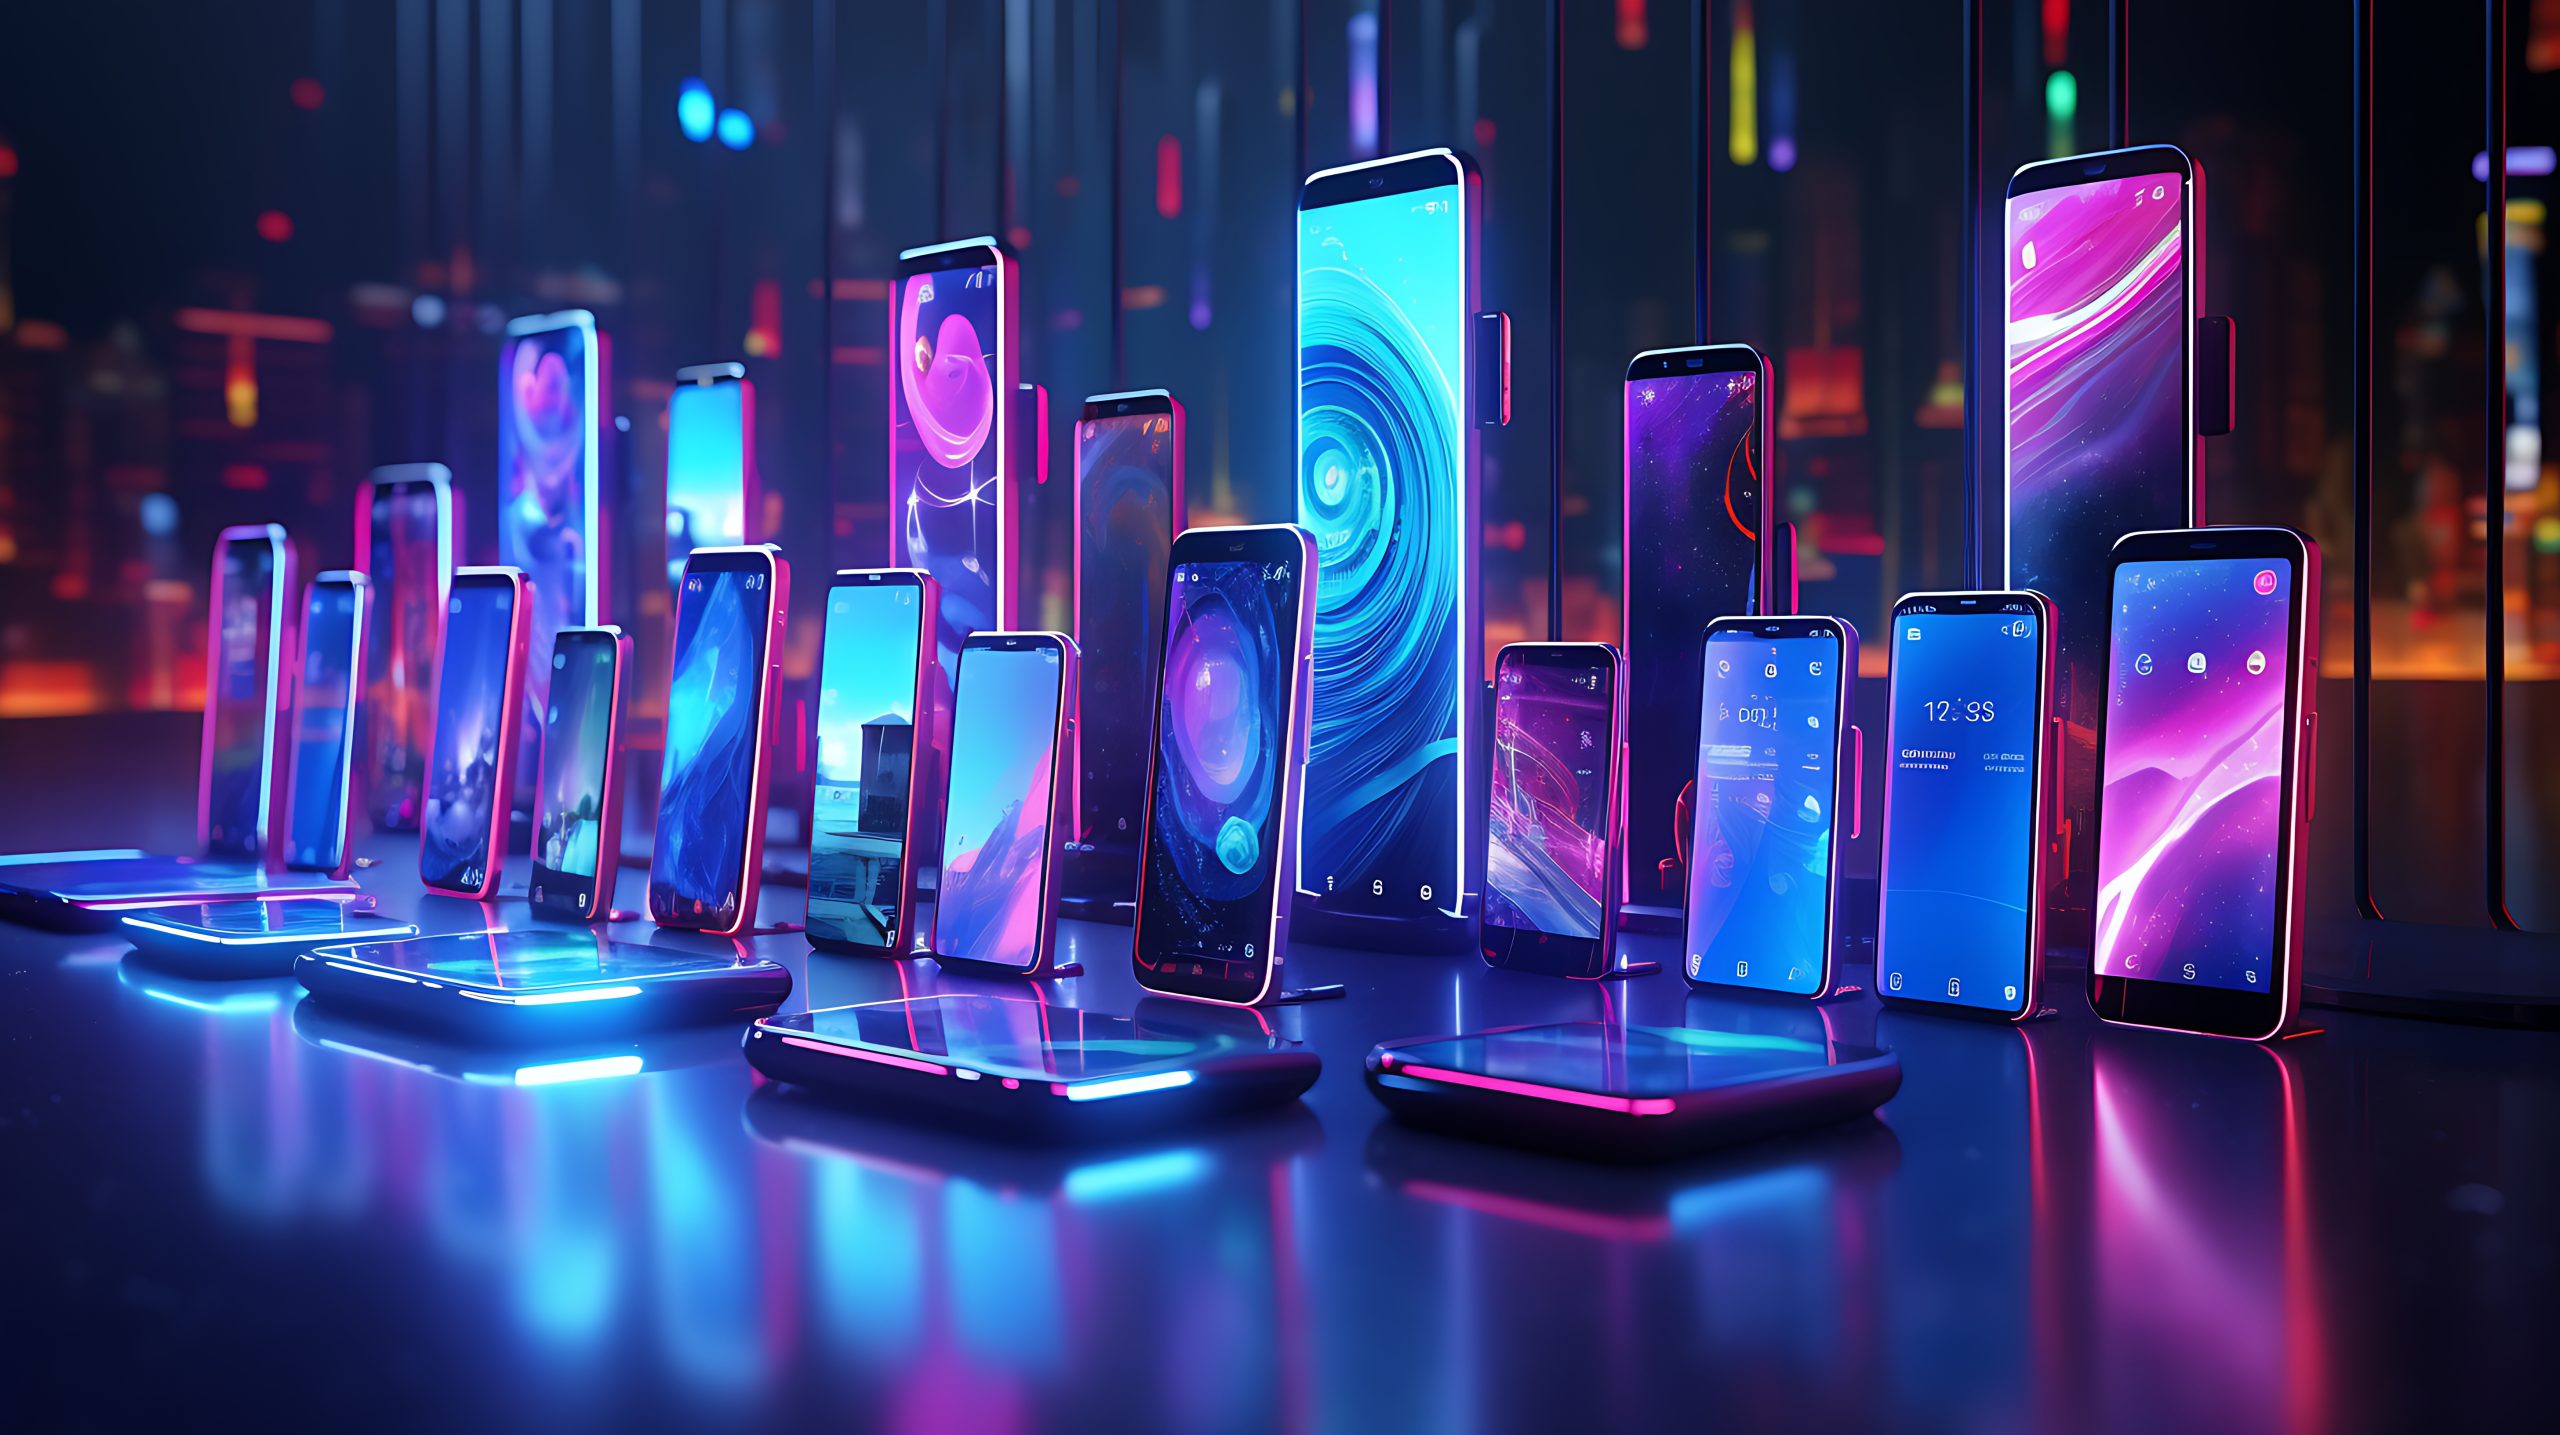 Ranking the Best Mobile Phones for Gaming in 2021